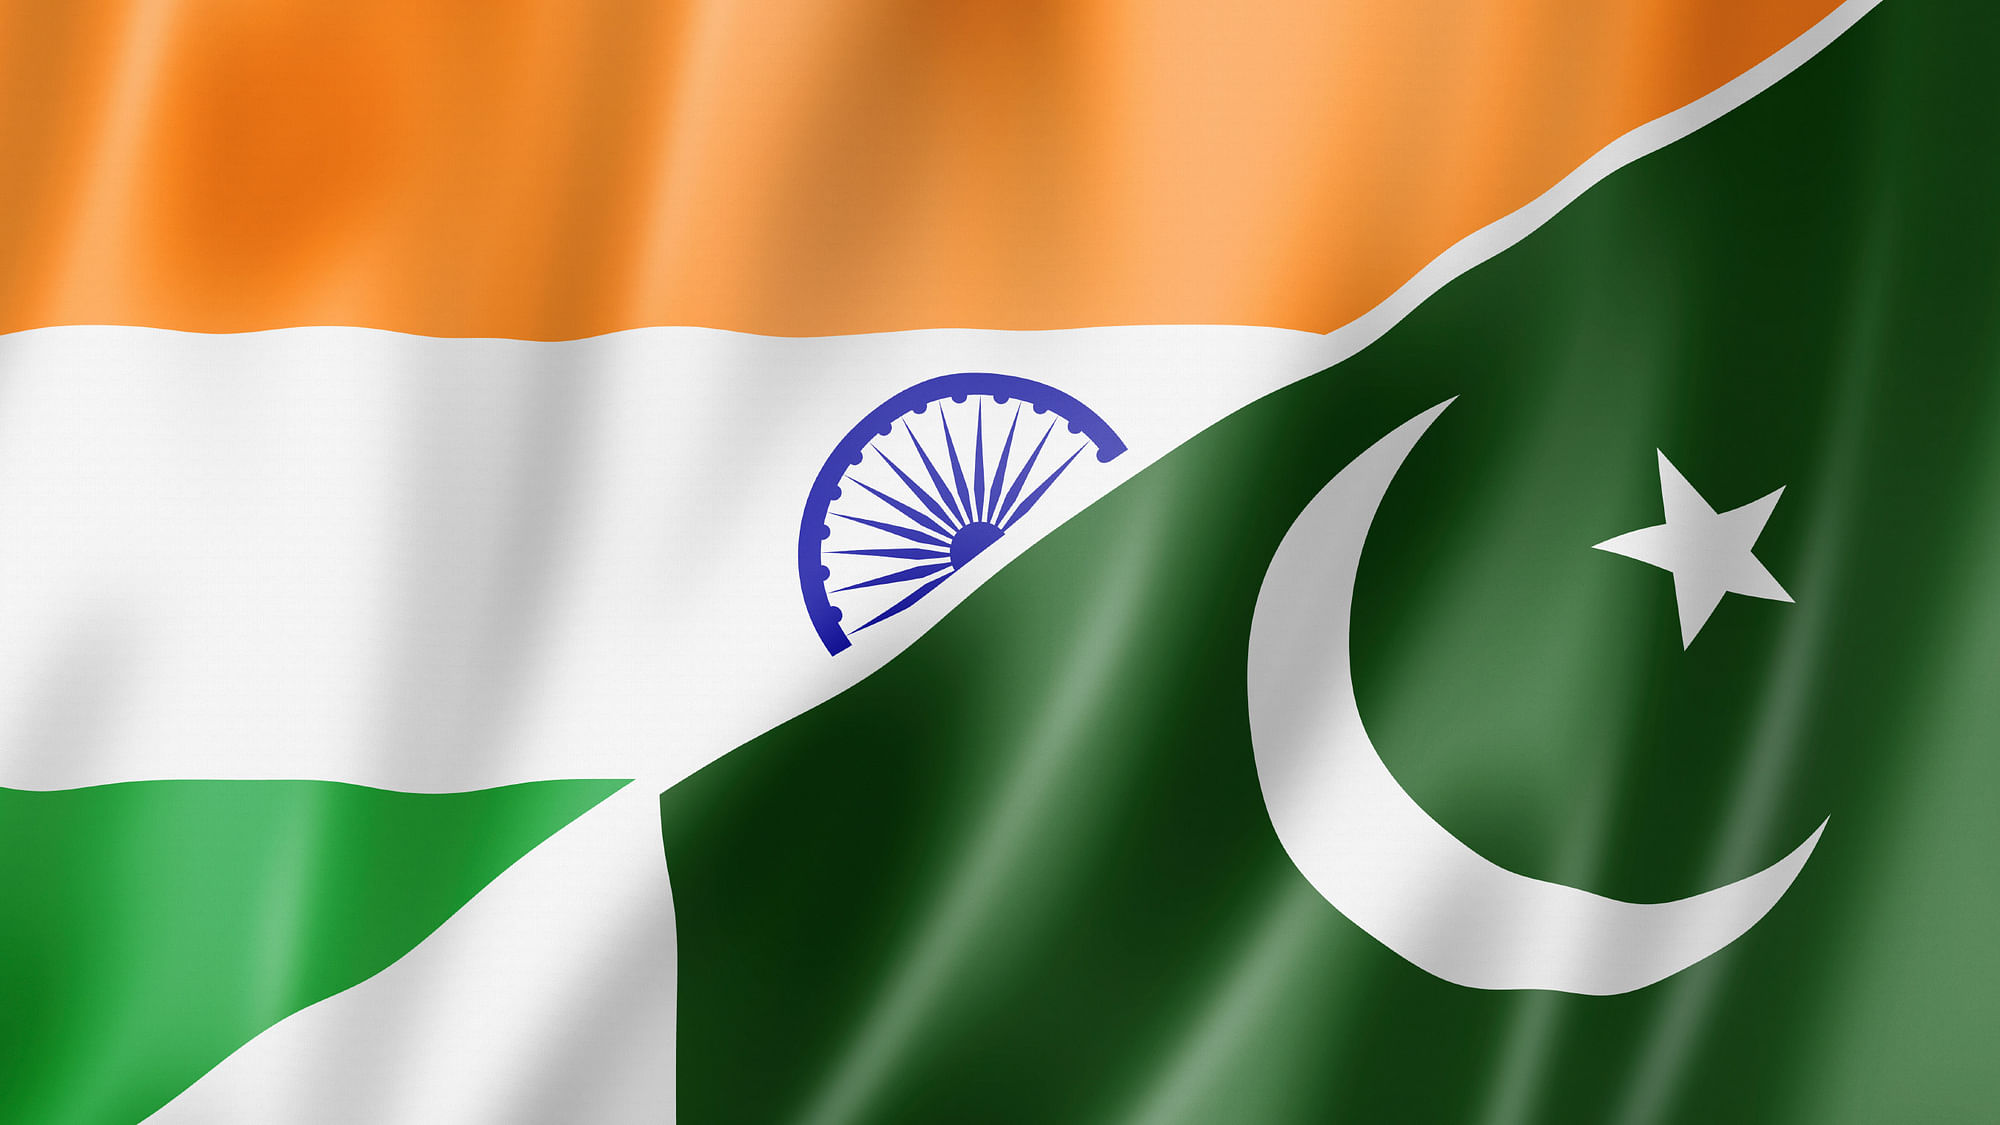 The Indian High Commission requested Pakistan to ensure that such incidents do not recur in future.